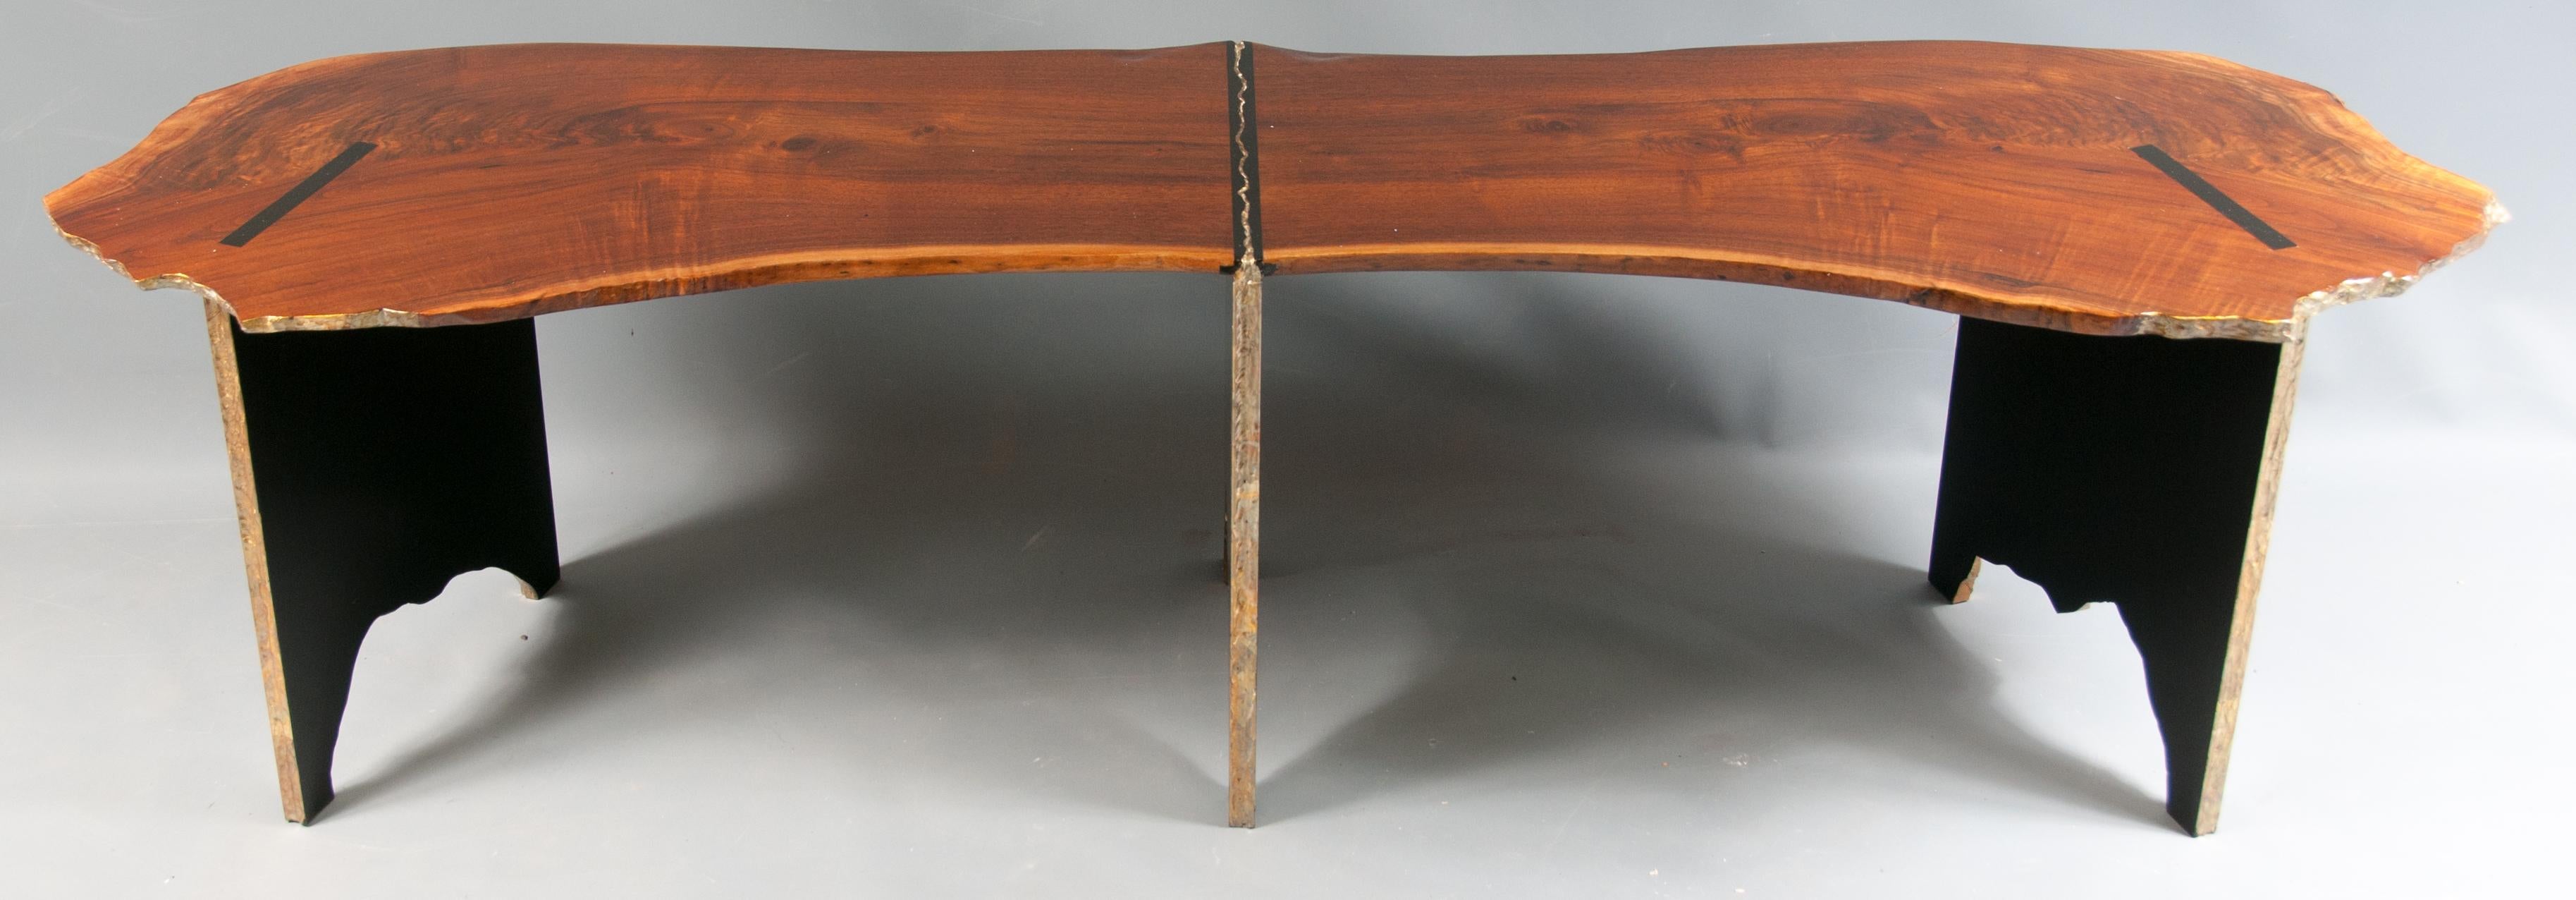 North American Live Edge Walnut Trestle Form Coffee Table with Carved and Gilt Elements For Sale